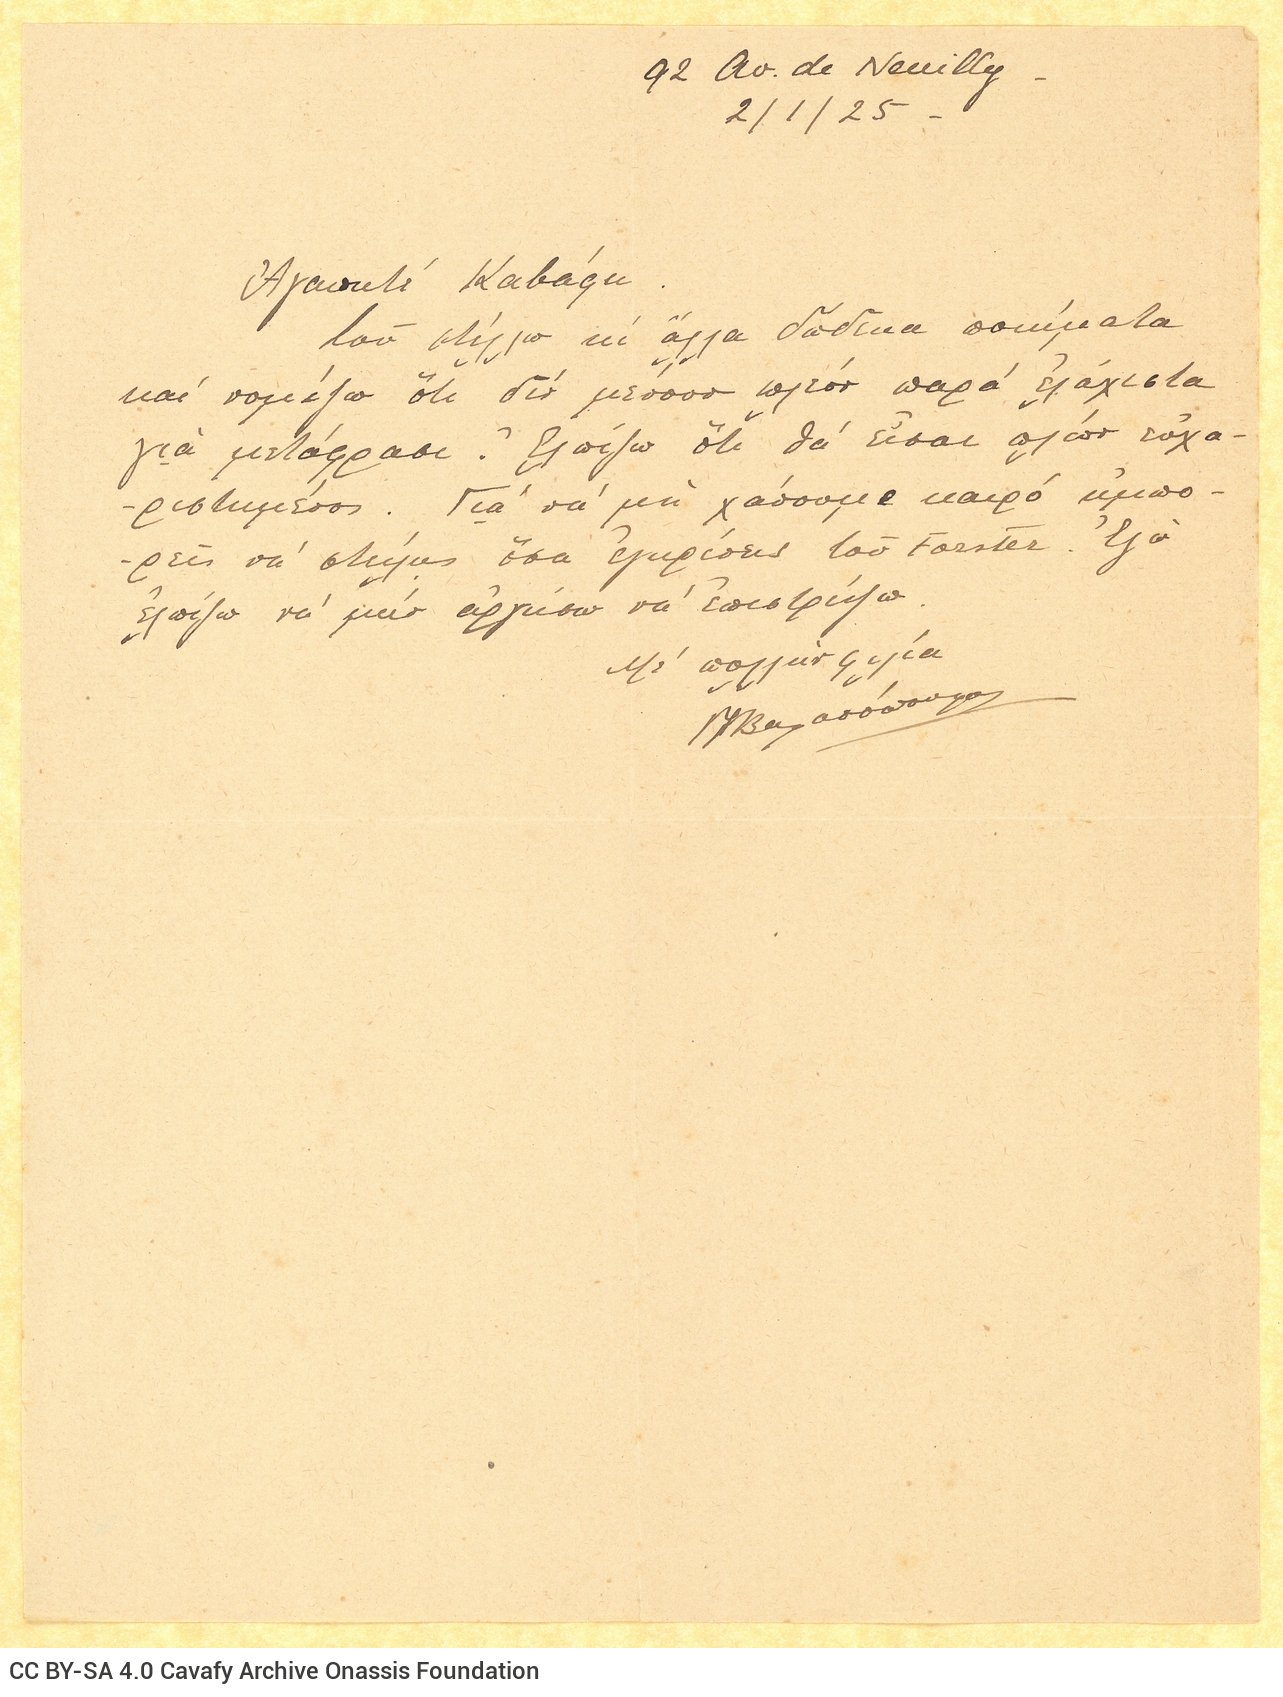 Two handwritten letters by G. A. Valassopoulo on the recto of two sheets. Blank versos. Valassopoulo informs Cavafy about the